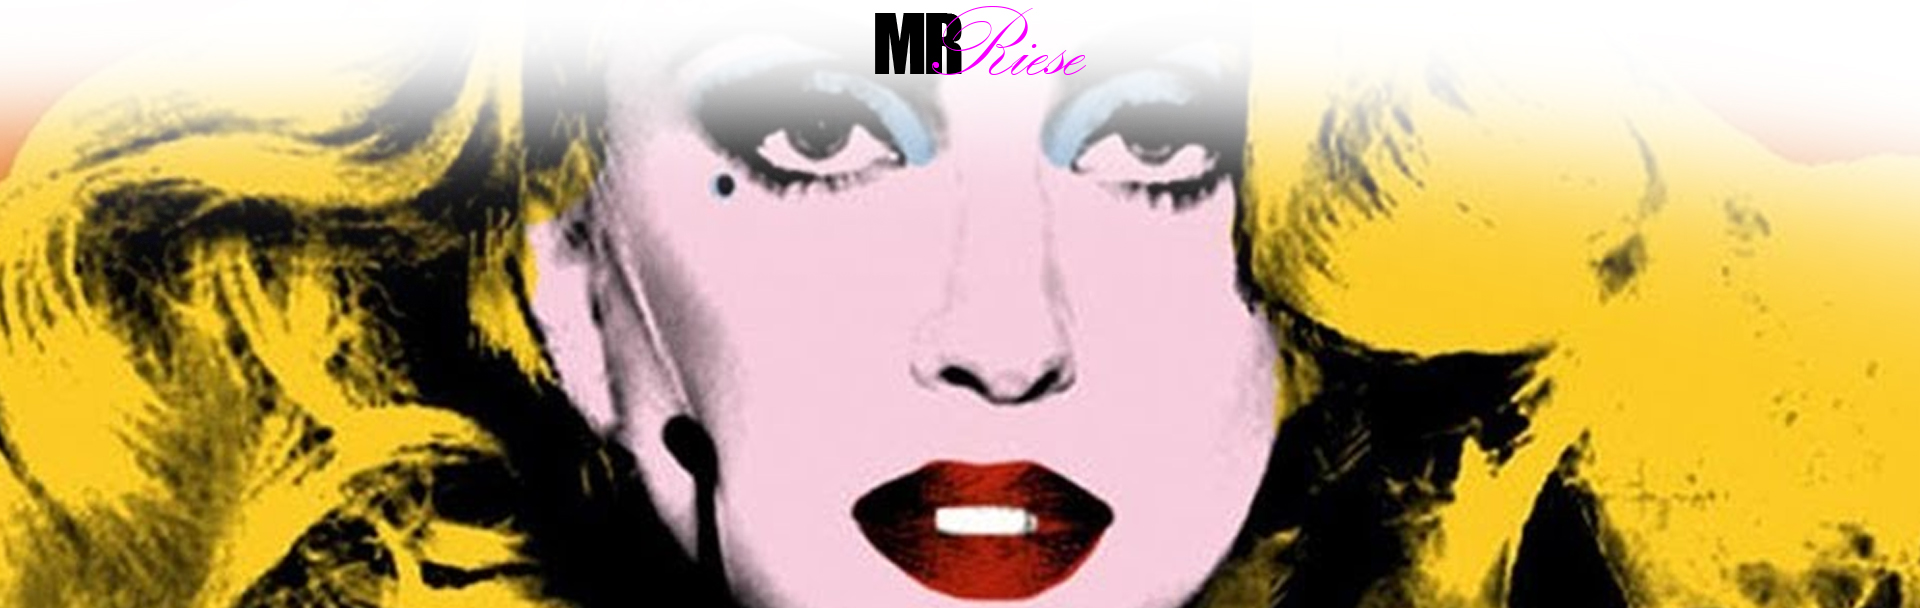 Andy Warhol Photoshop Project | Mr. Riese